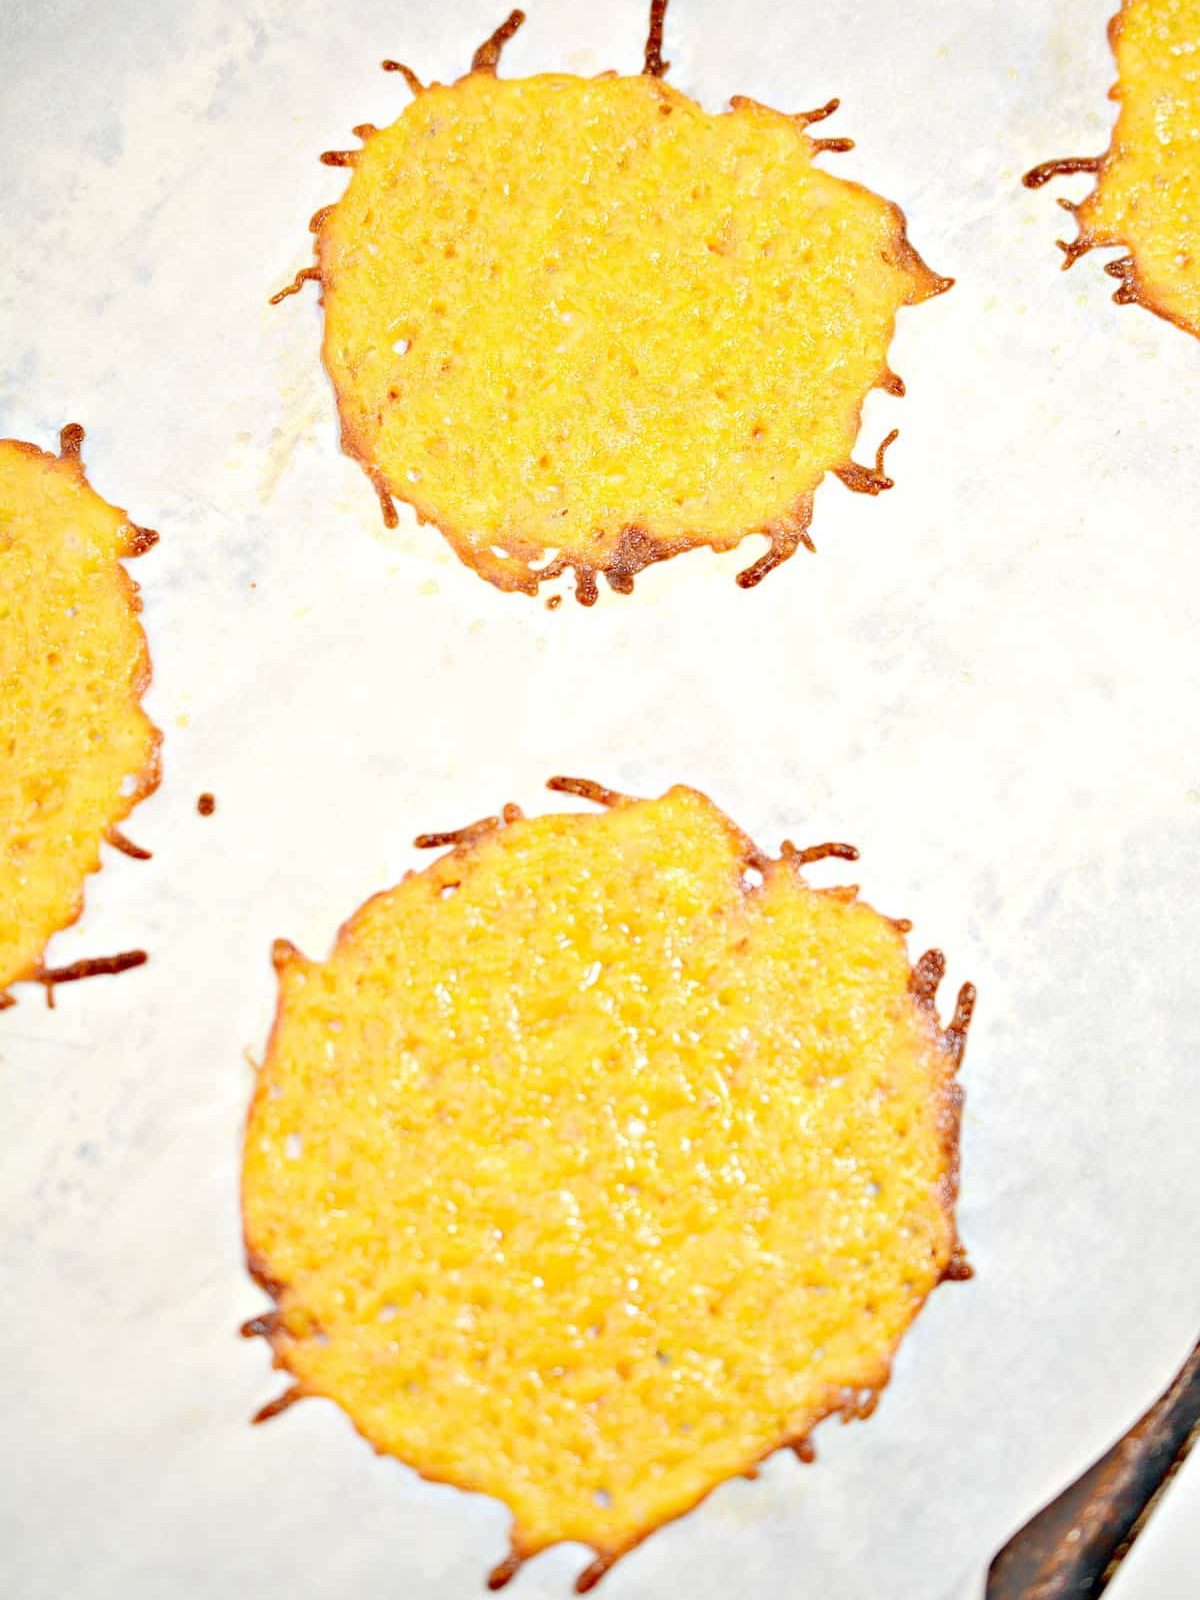 Bake the cheese for 8-10 minutes until it just starts to brown on the edges, and takes on a lace-like appearance.